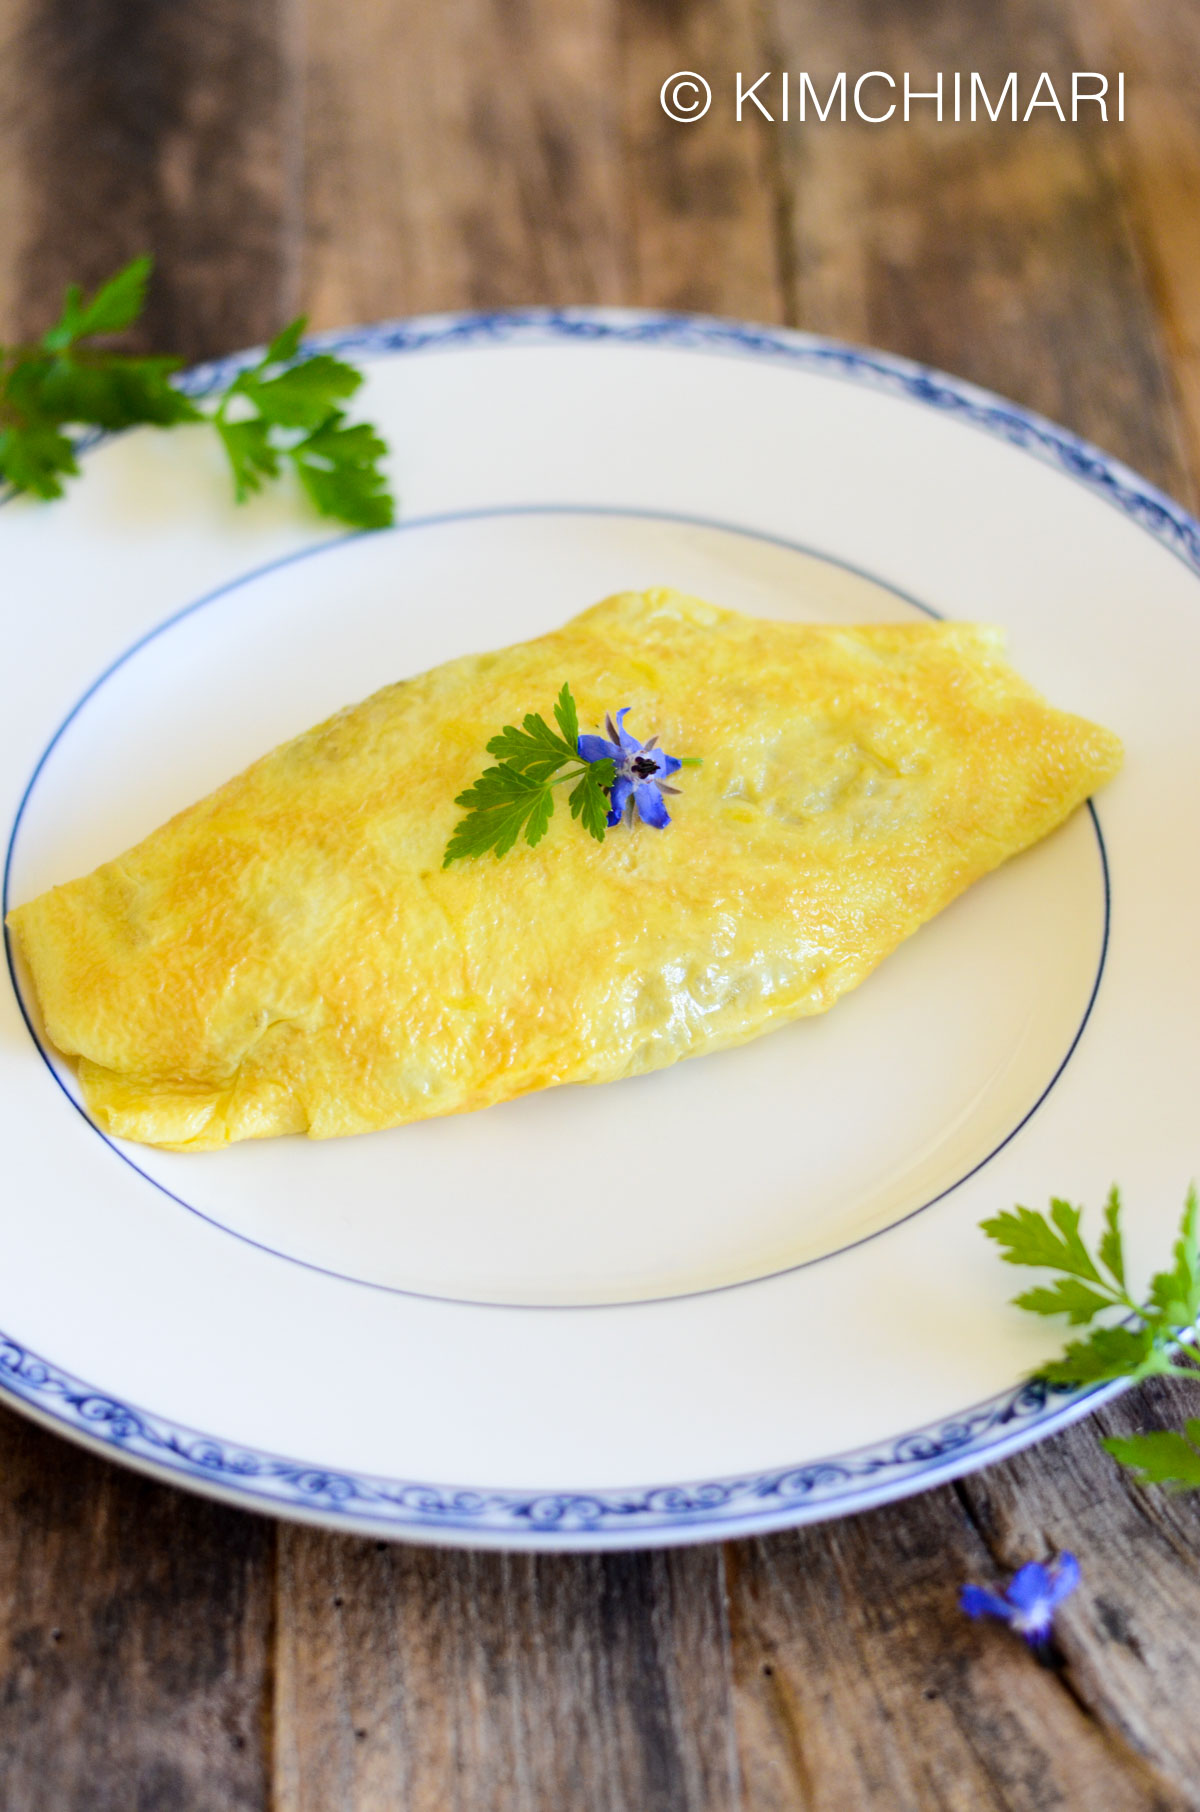 omurice served on white plate garnished with parsely and boroage blossoms